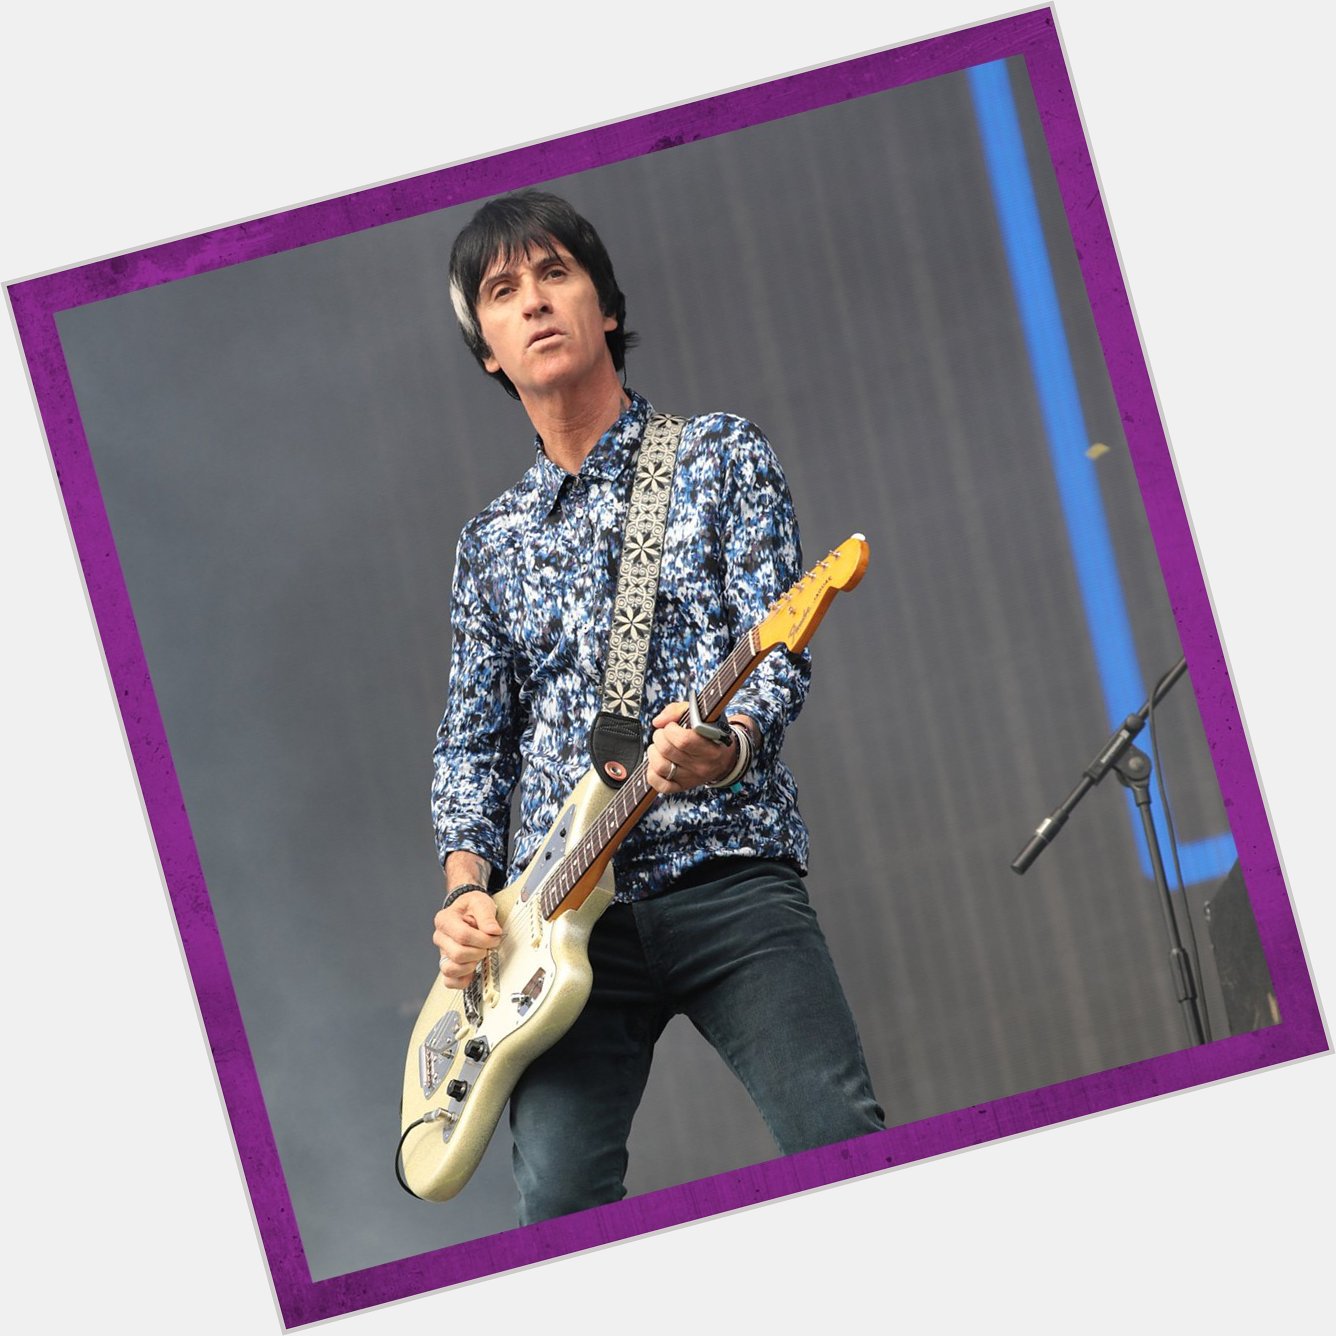 Happy birthday to this icon. Johnny Marr is 56 today 